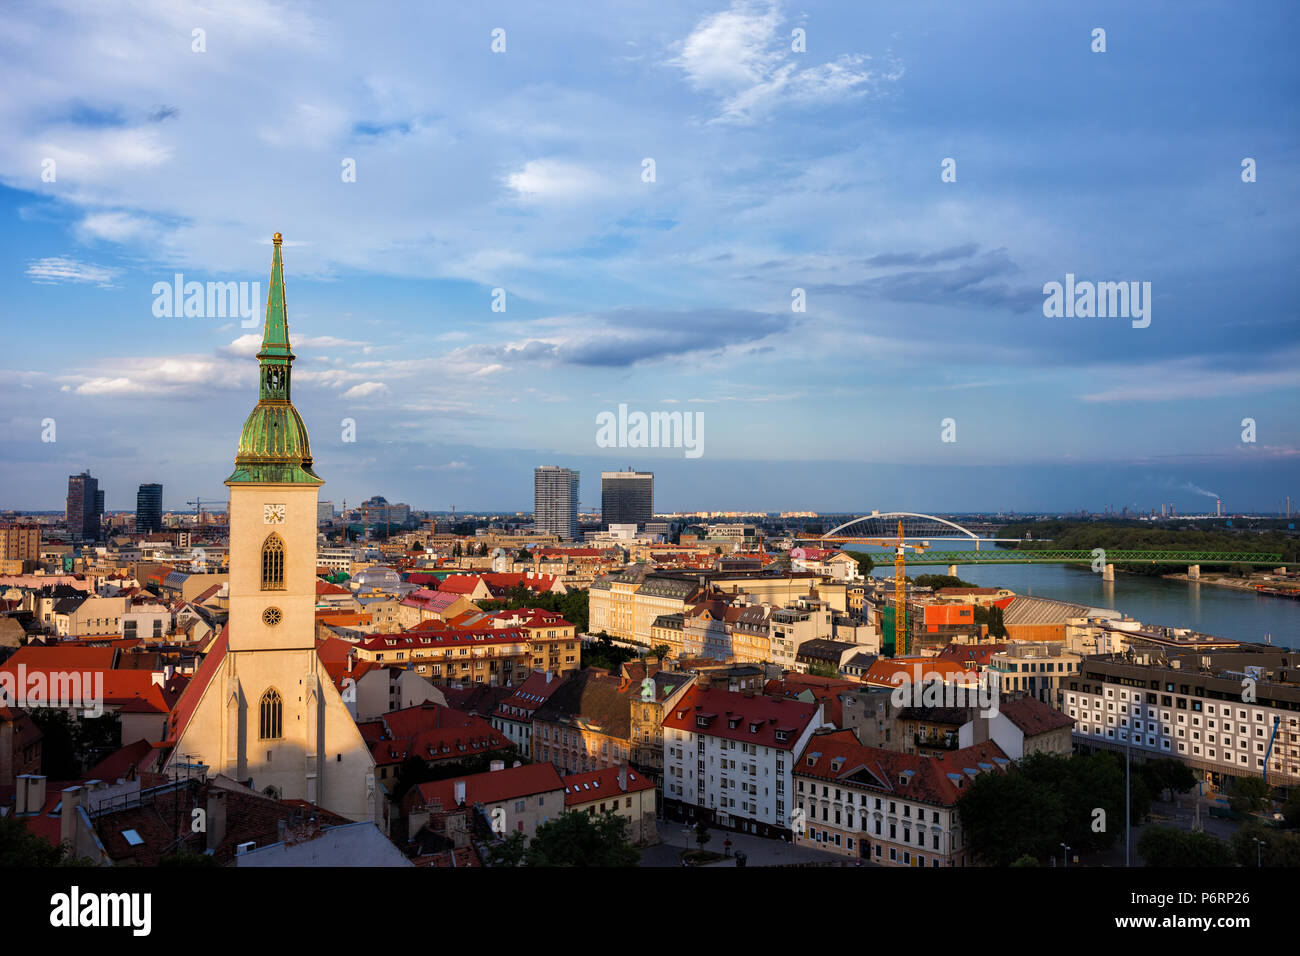 Bratislava capital city of Slovakia at sunset, cityscape with the Old Town and St Martin Cathedral Stock Photo